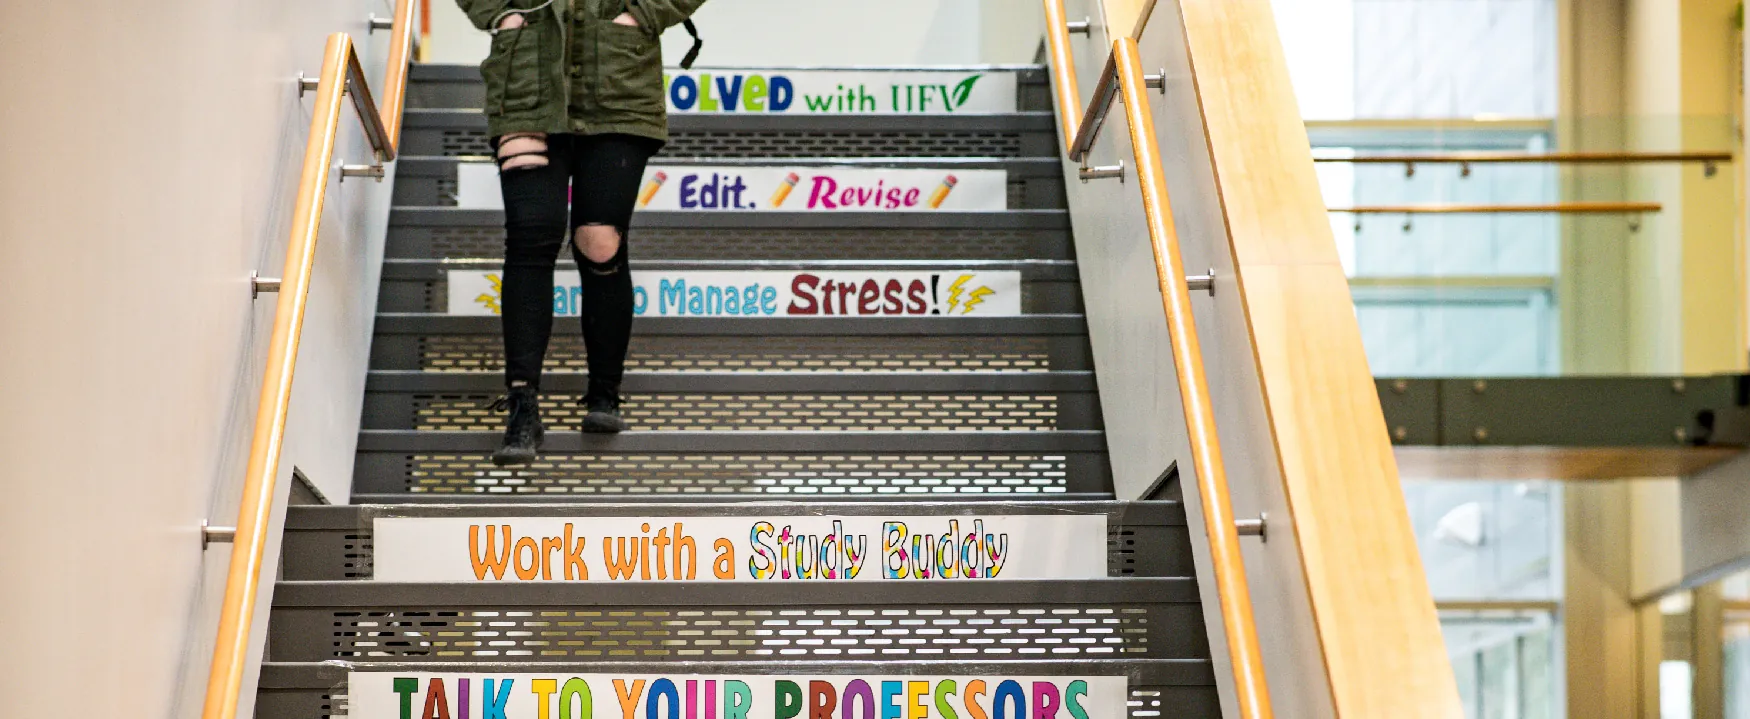 A photo shows the legs of a woman in casual wear walking down the stairs of a building featuring promotional messages including, “Solved with I I F V,” “Work with a Study Buddy,” and “Talk to your professors.”